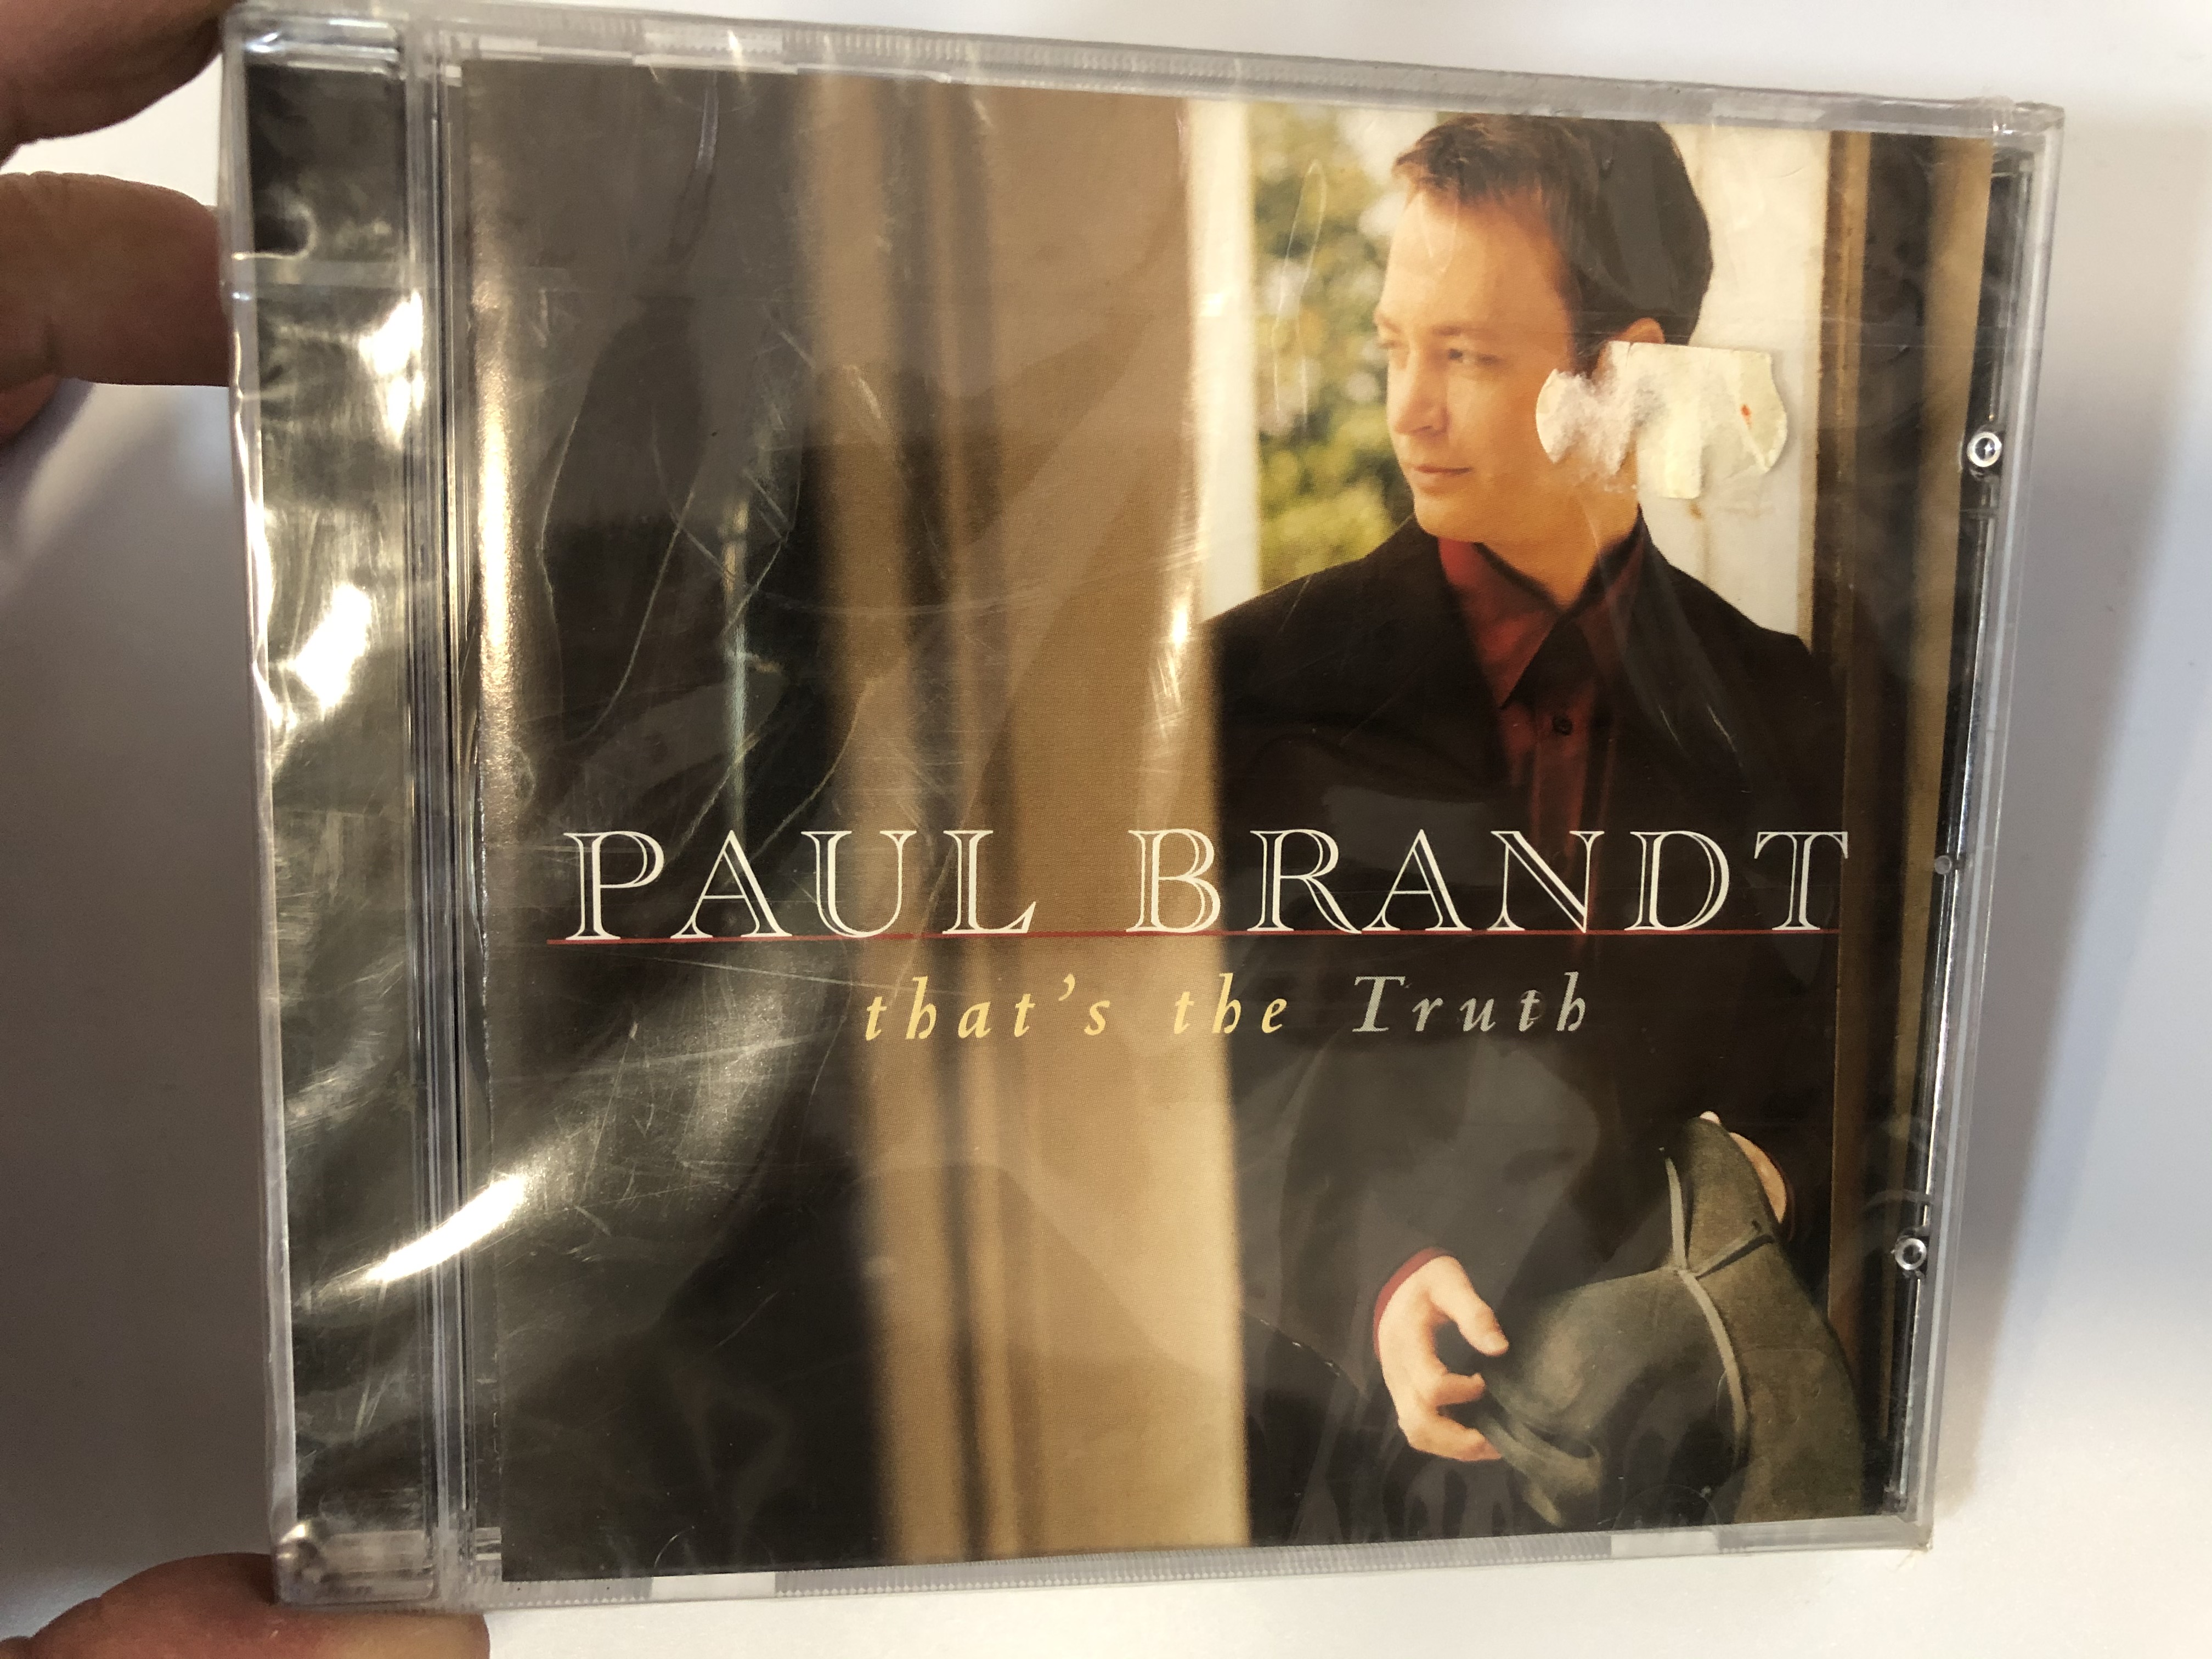 paul-brandt-that-s-the-truth-reprise-records-audio-cd-1999-9362-47319-2-1-.jpg